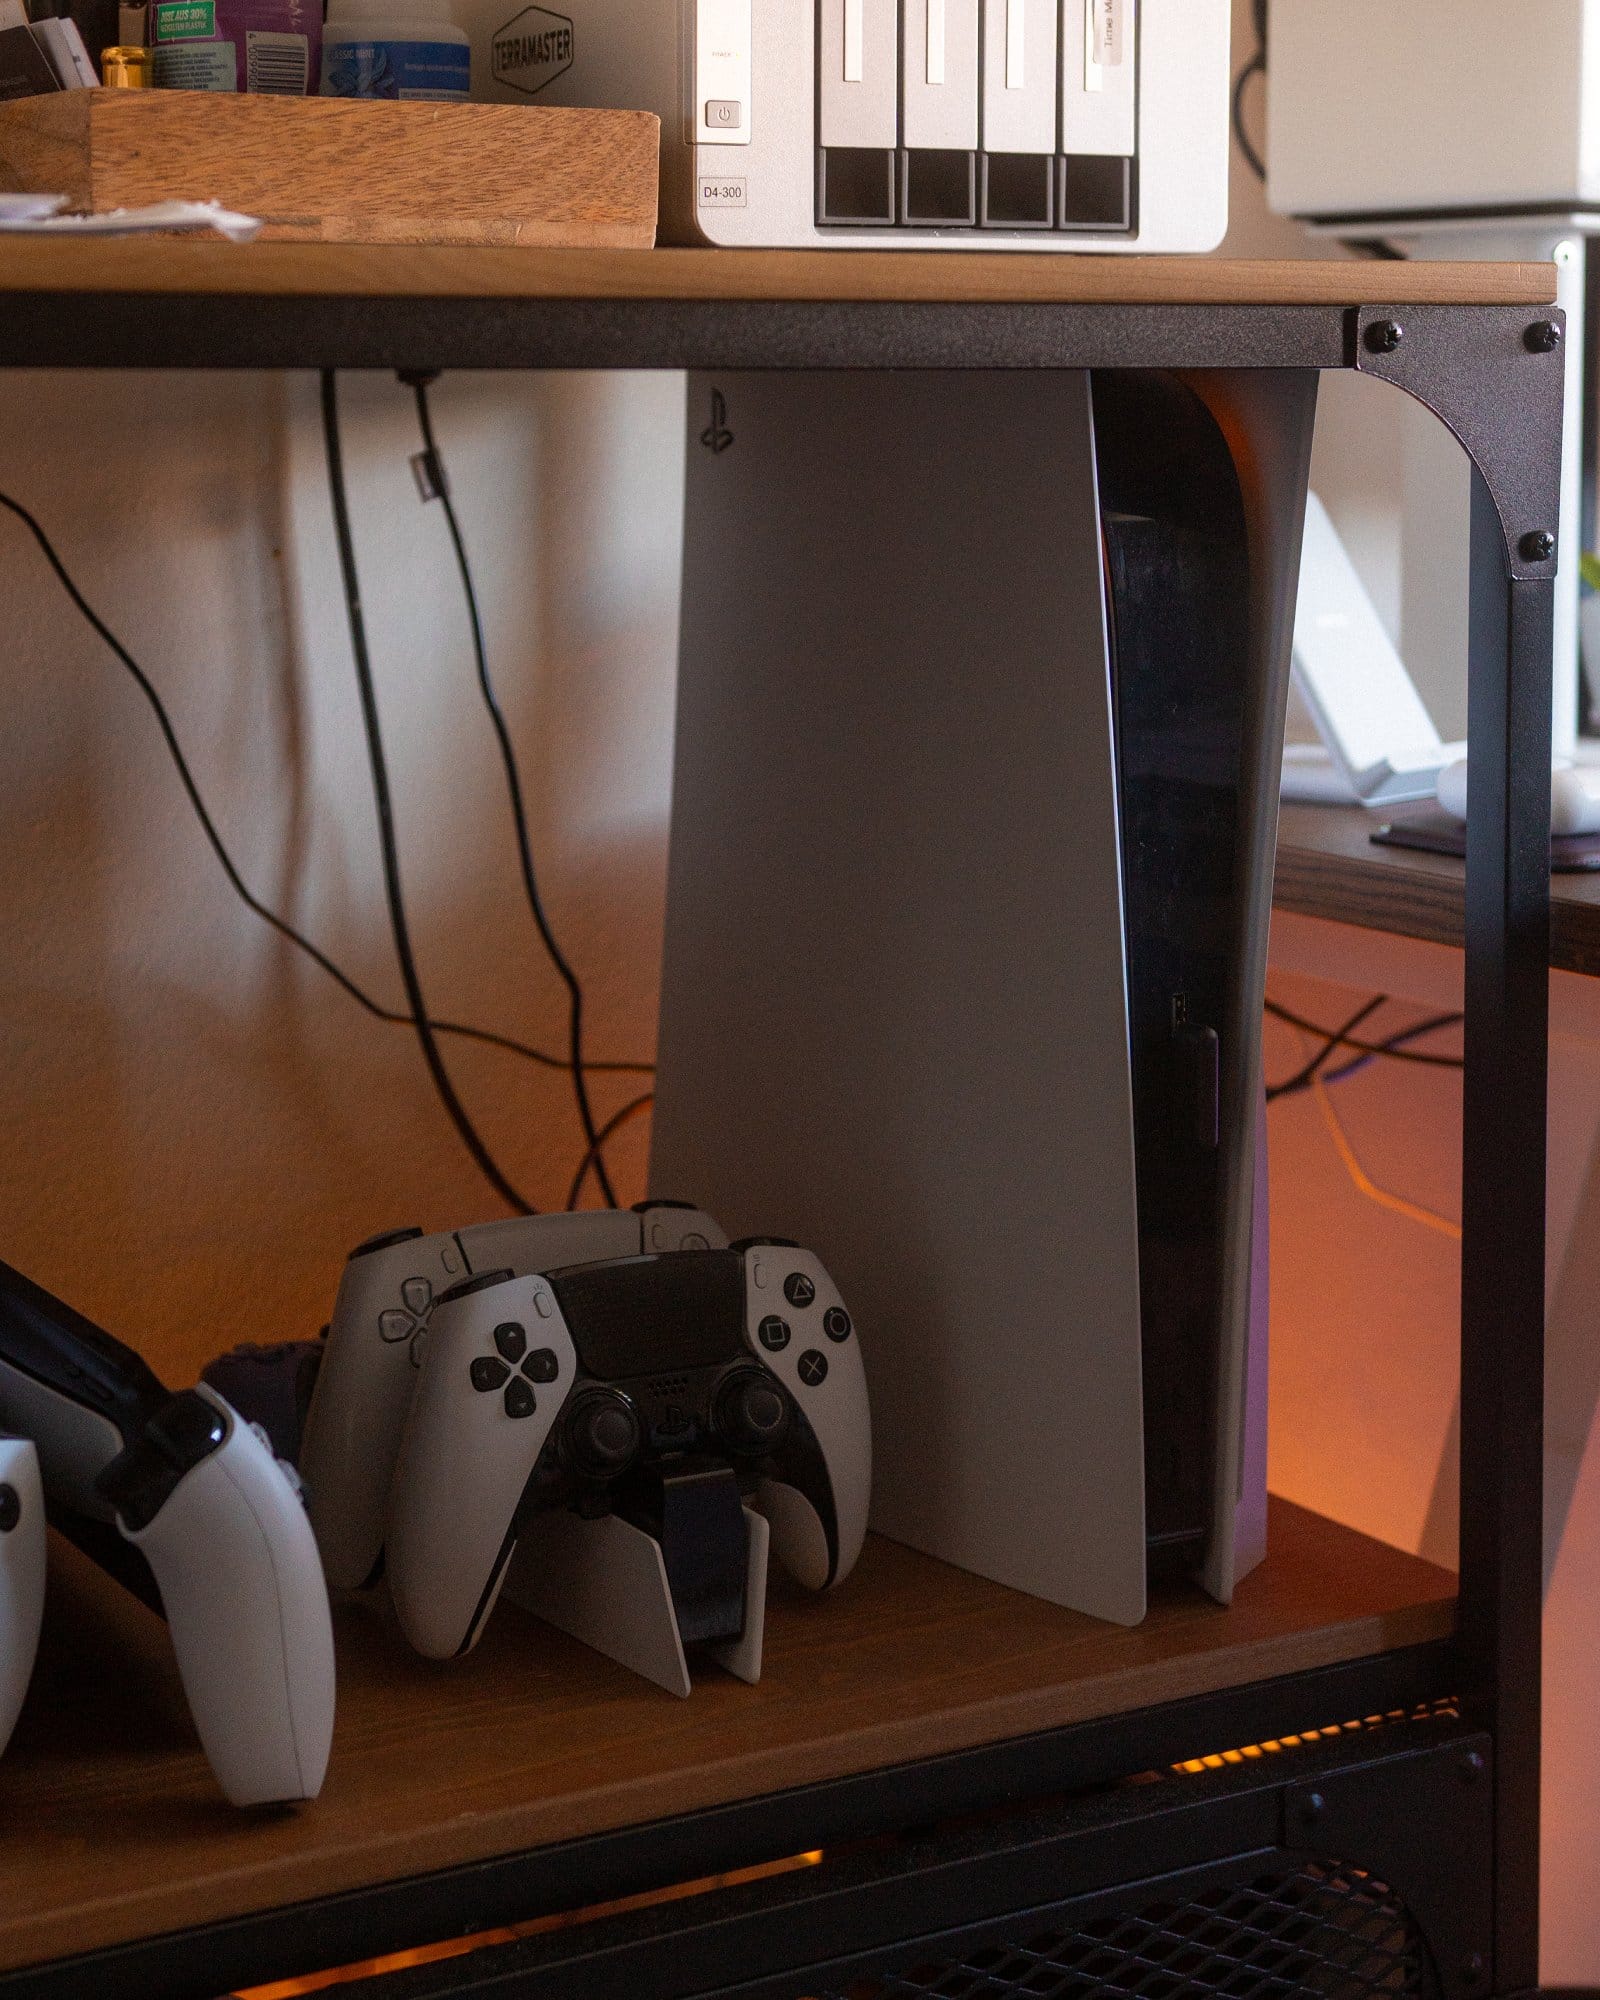  A gaming console PlayStation 5 stands upright next to its controllers on a shelf beneath a desk, with wires visible in the background and a soft glow of light